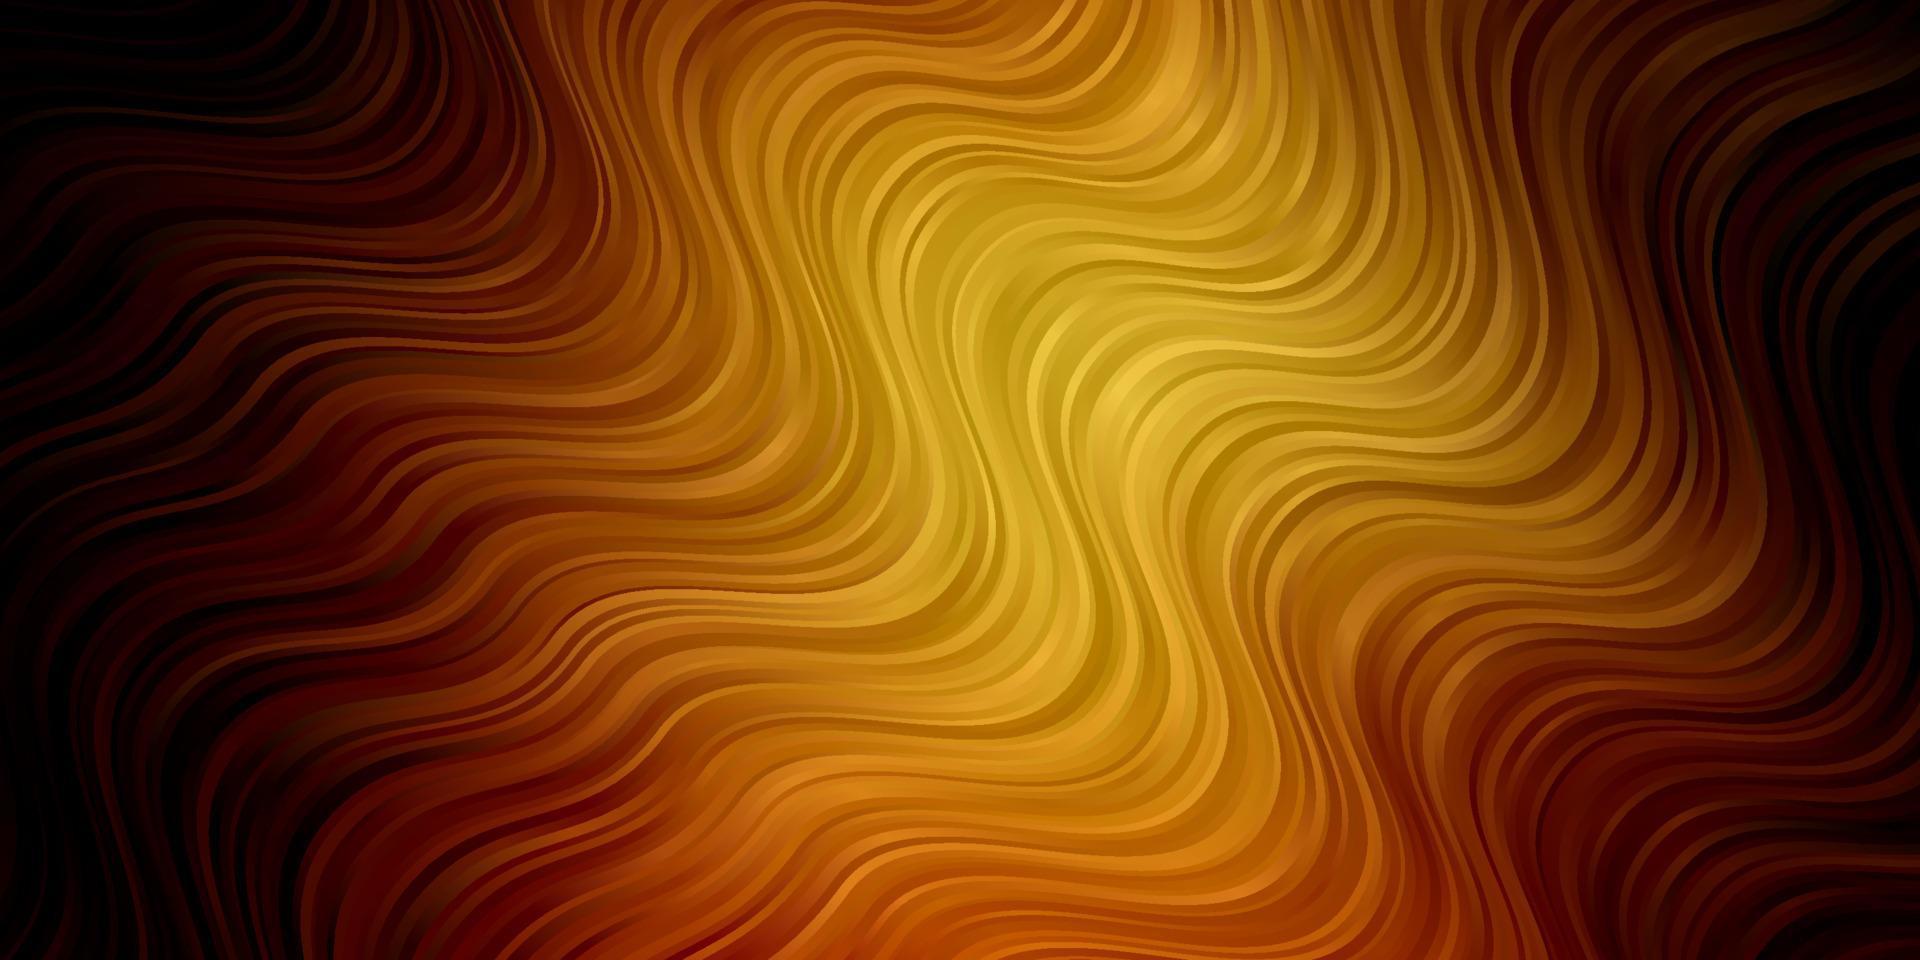 Dark Orange vector template with curved lines.